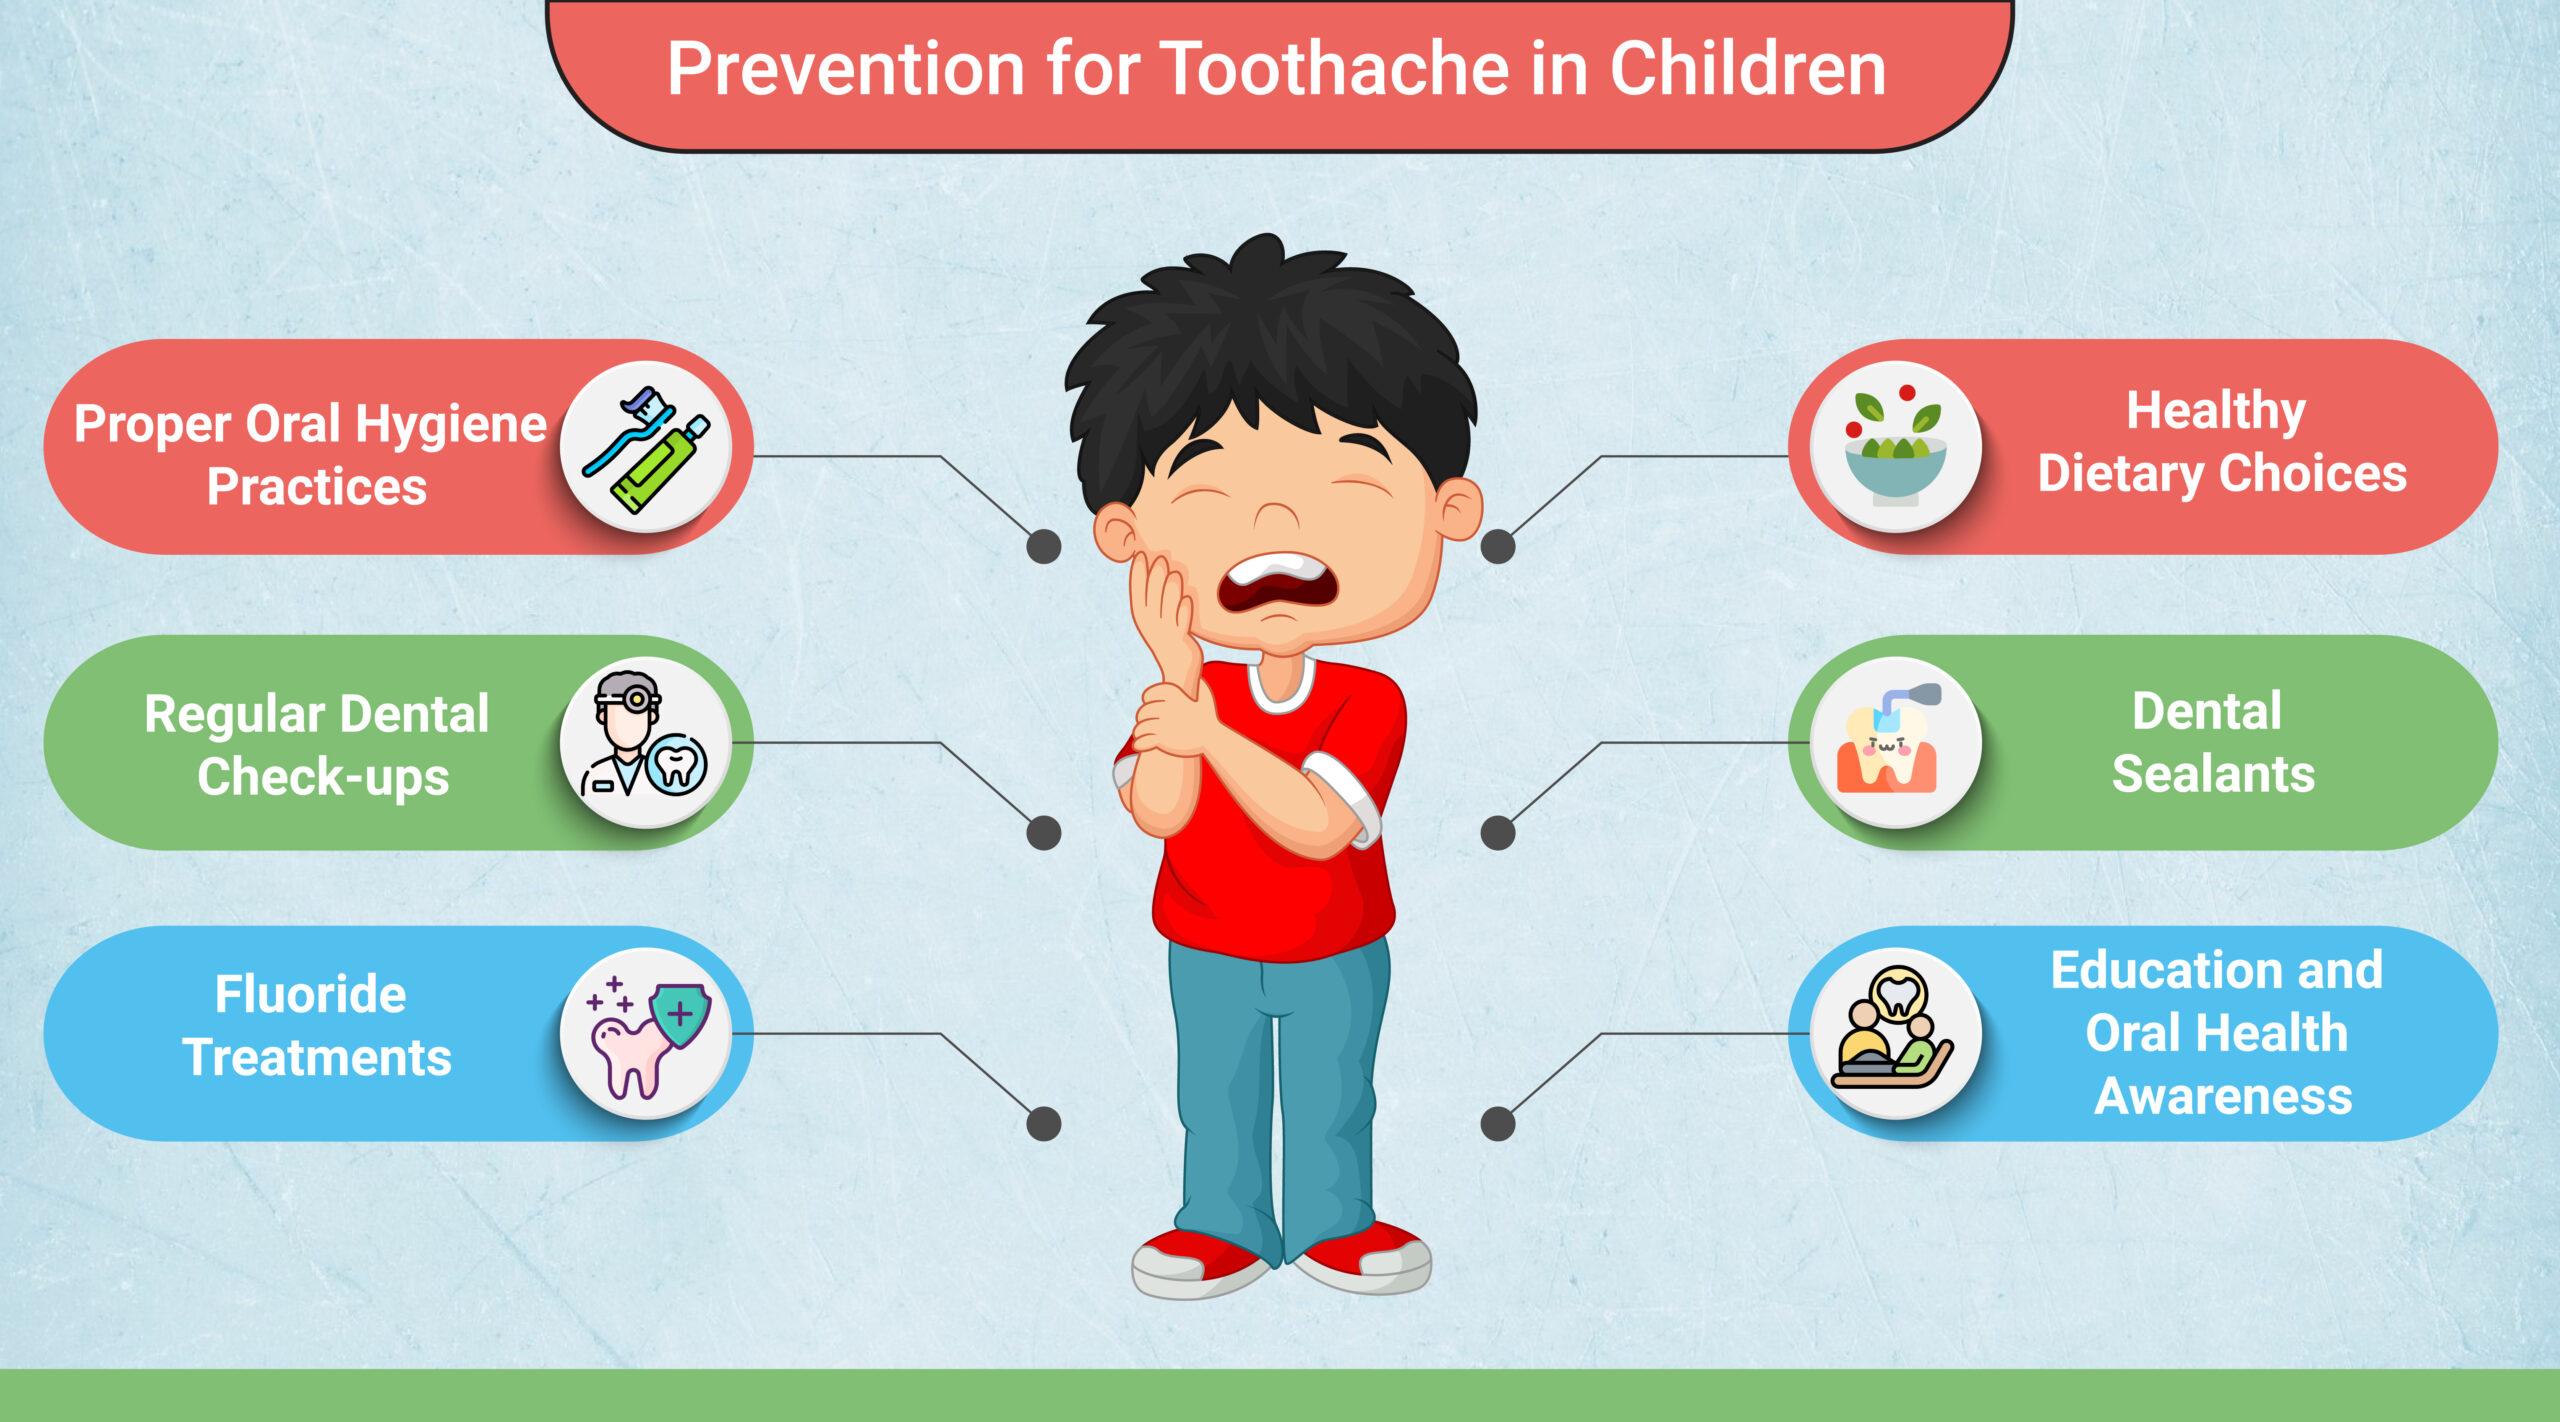 Toothache prevention